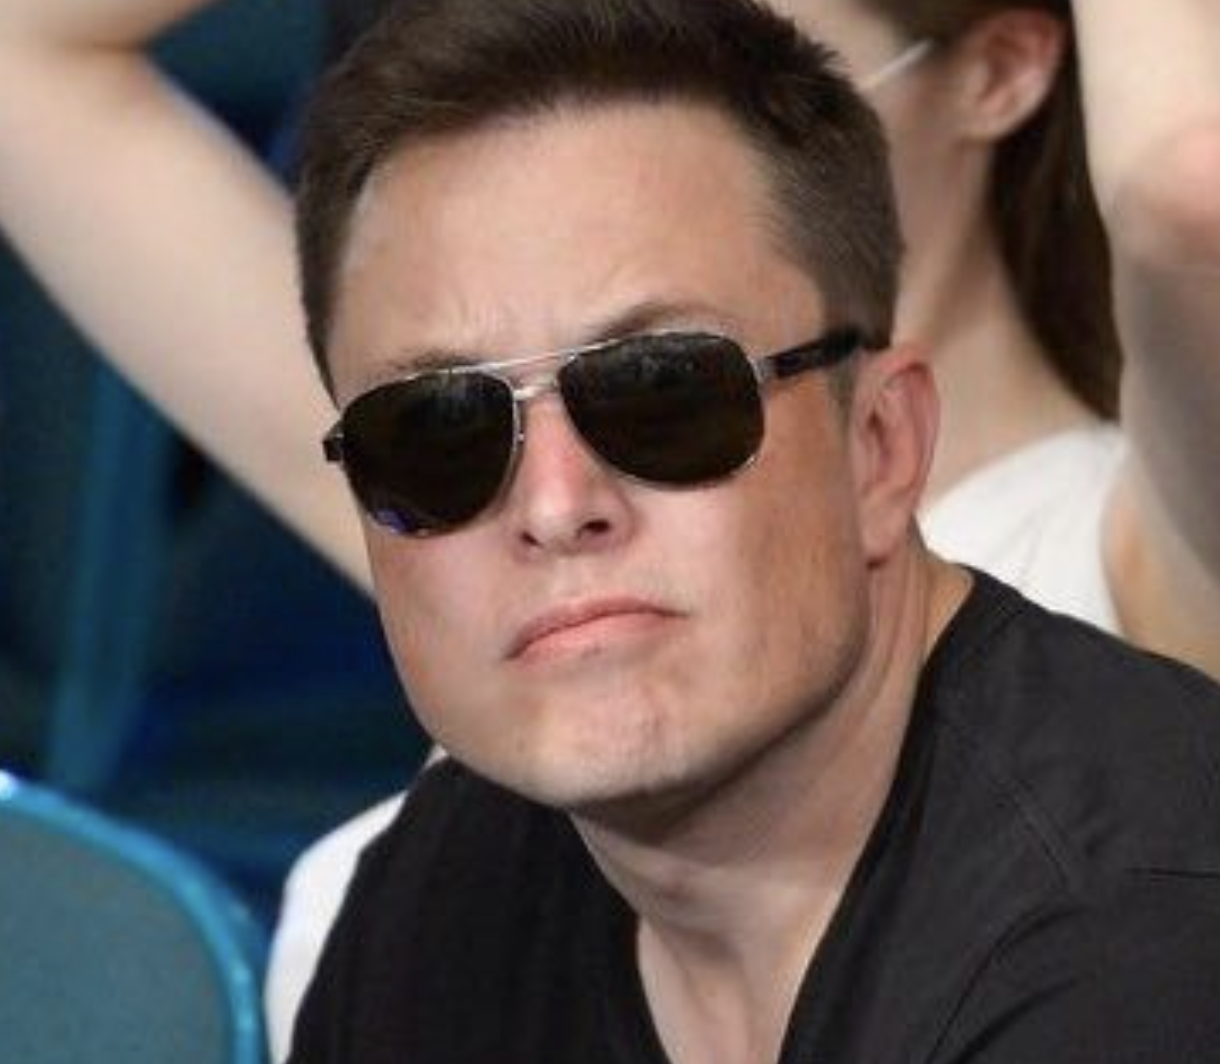 What Style of Sunglasses Does Elon Musk Wear?